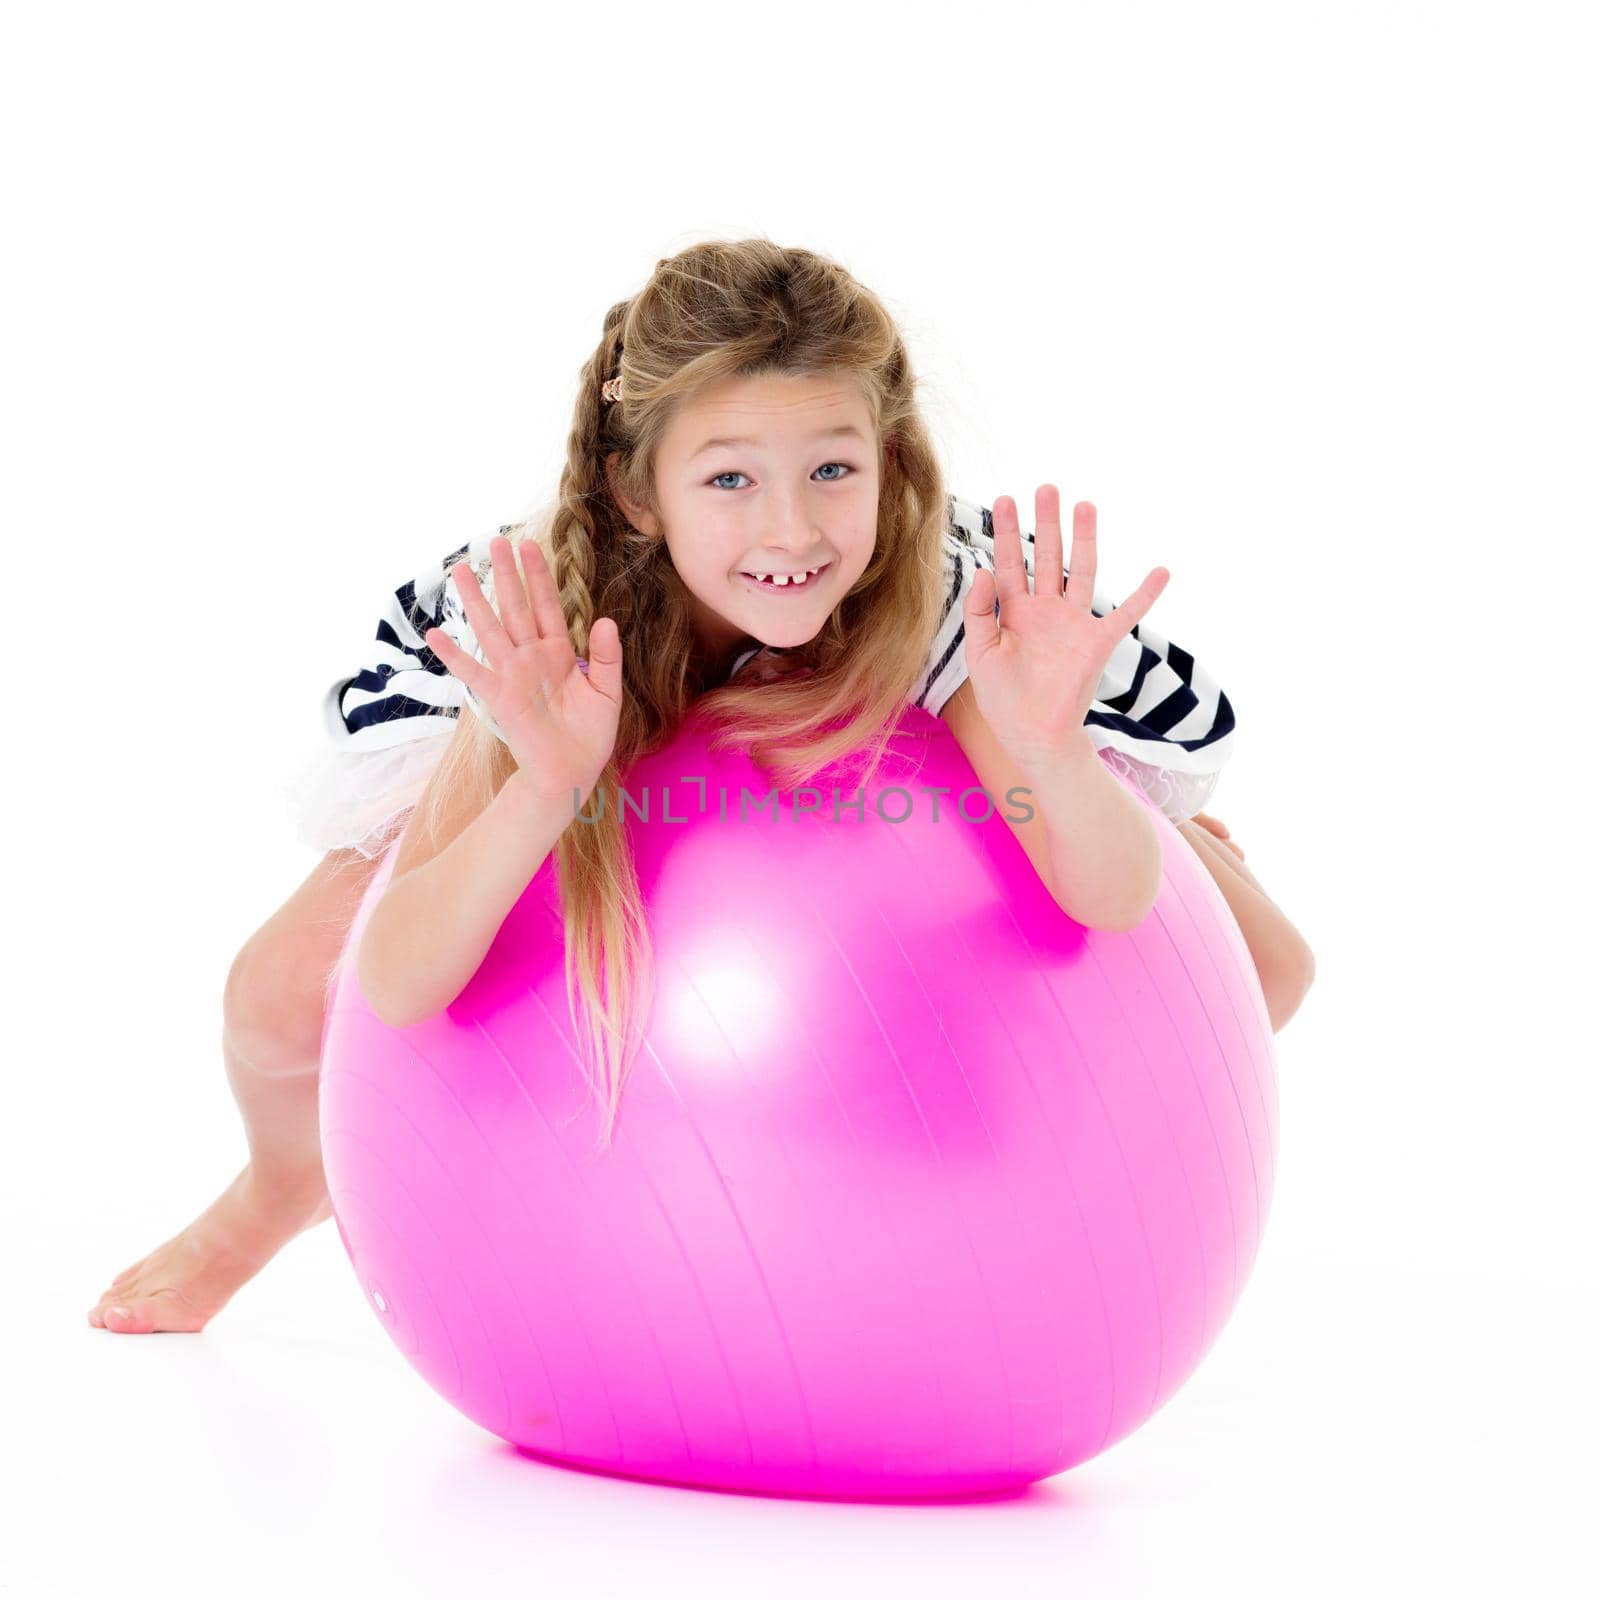 A good girl is playing with a big inflatable ball. The concept of a happy childhood, recreation in nature, exercise. Isolated on white background.